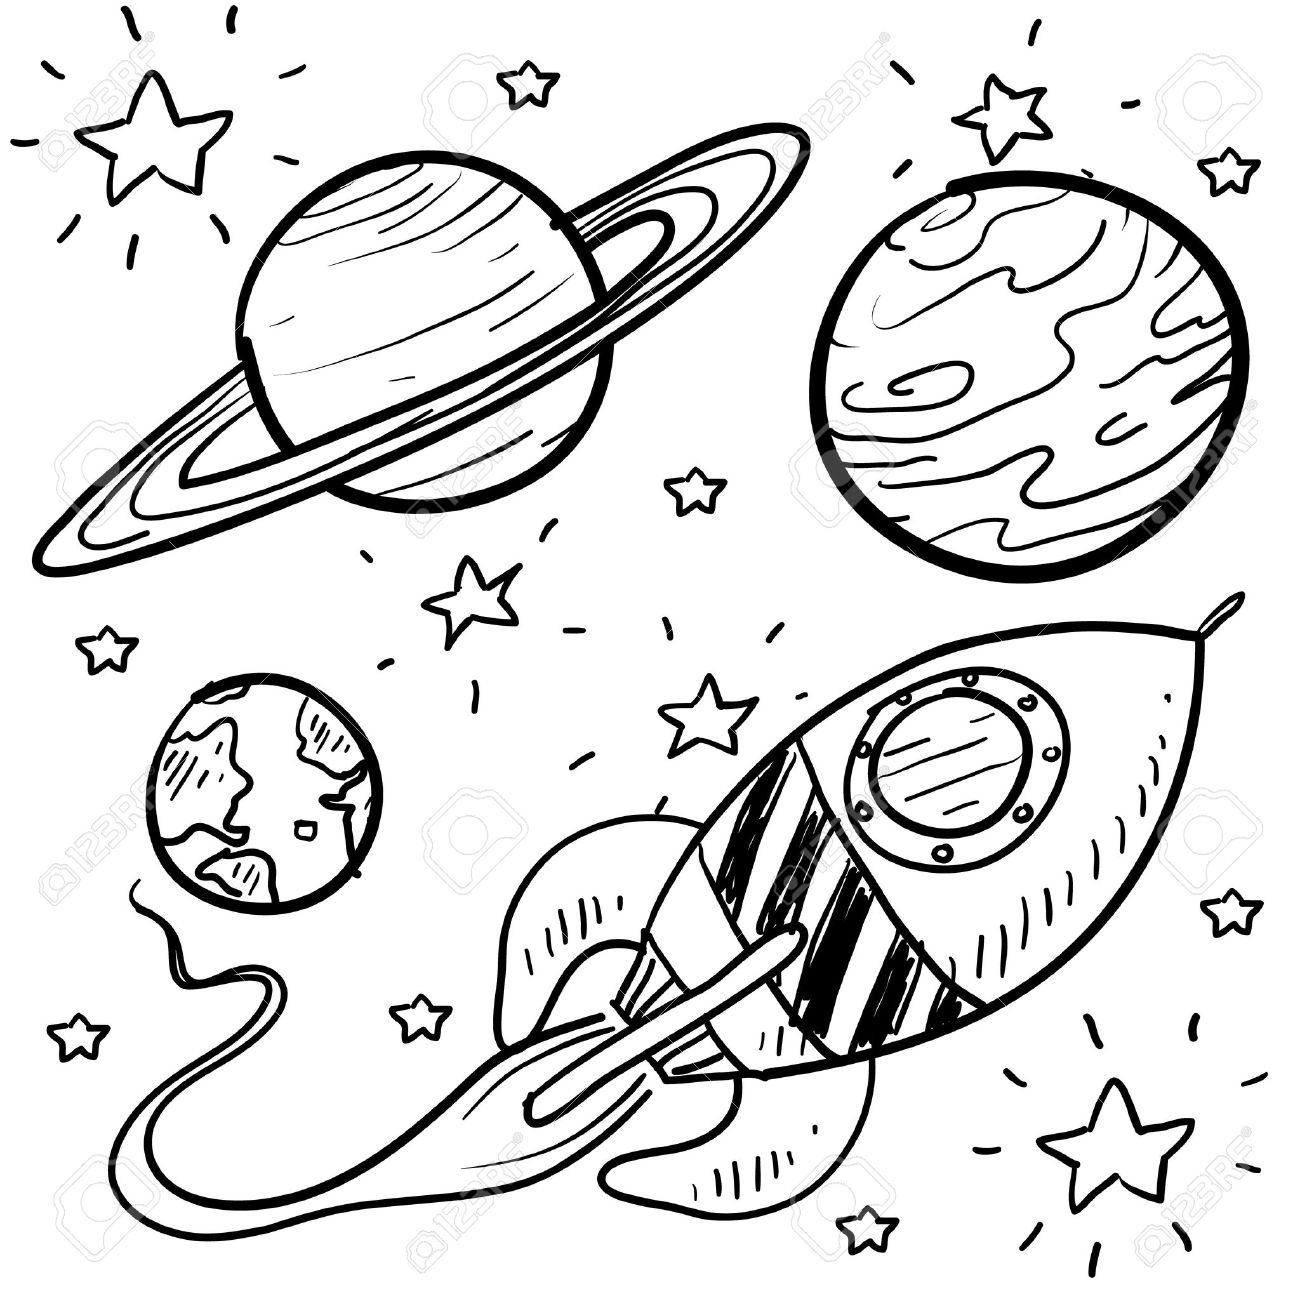 14419970-Doodle-style-science-fiction-set-sketch-in-vector-format-Set-includes-retro-rocket-ship-and-a-variet-Stock-Photo.jpg